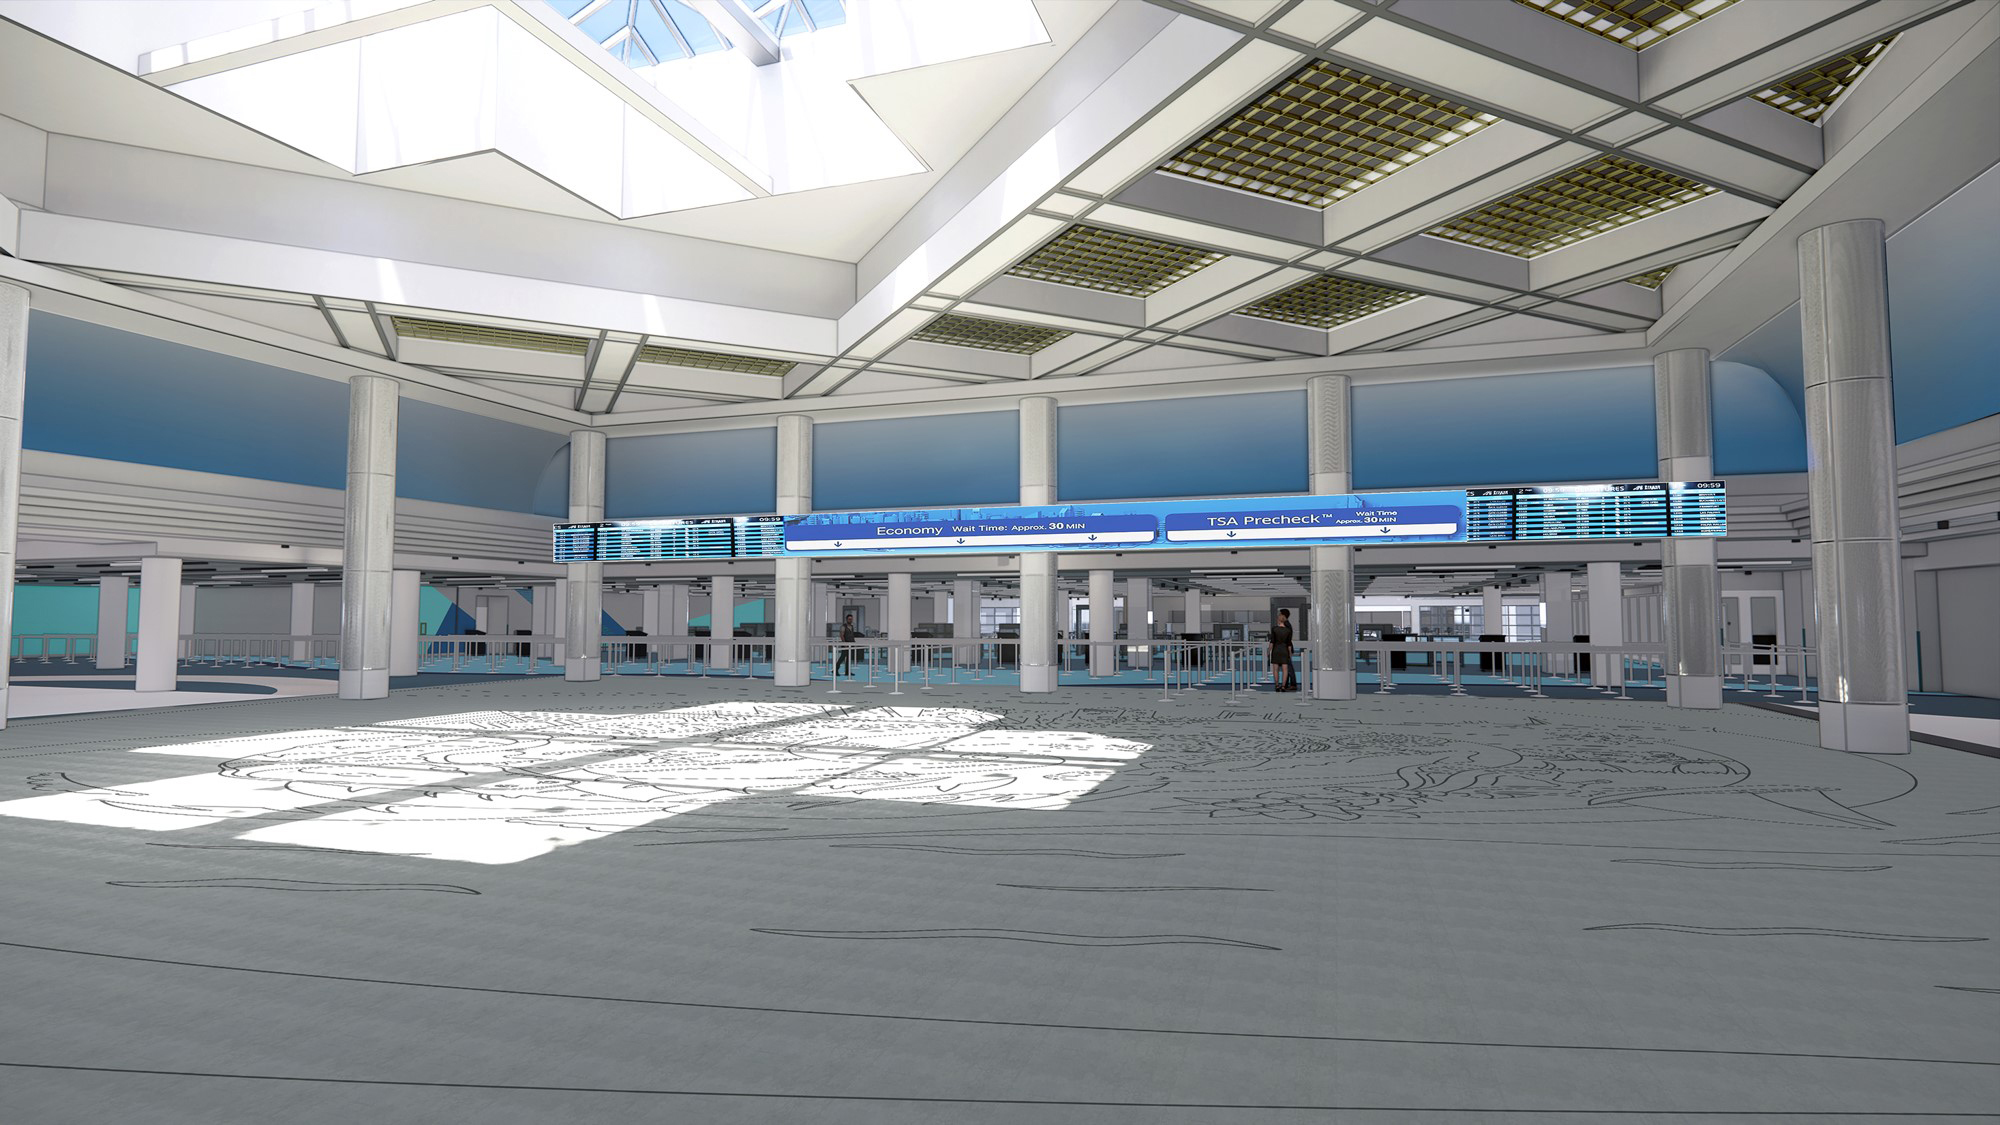 The first project in the Concourse B expansion is the security checkpoint renovations to increase passenger capacity.